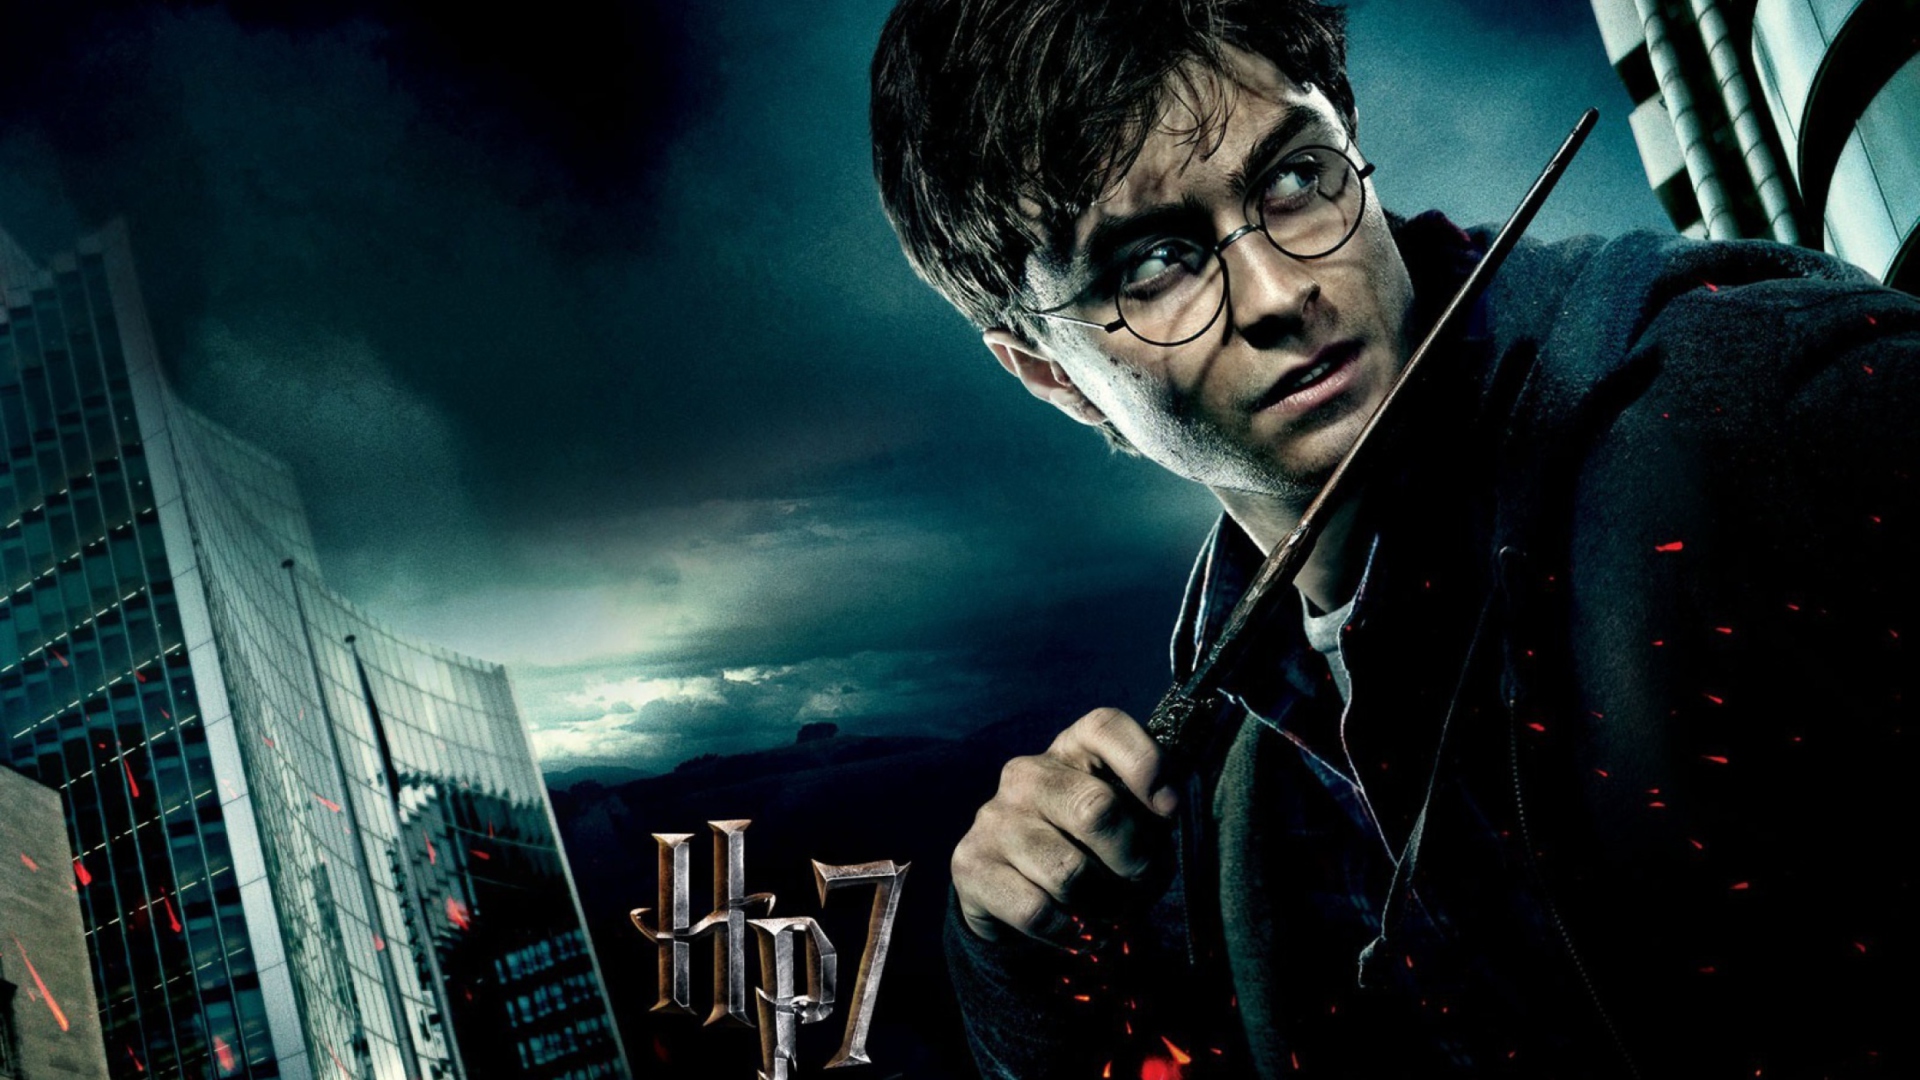 Harry Potter And The Deathly Hallows Part-1 screenshot #1 1920x1080